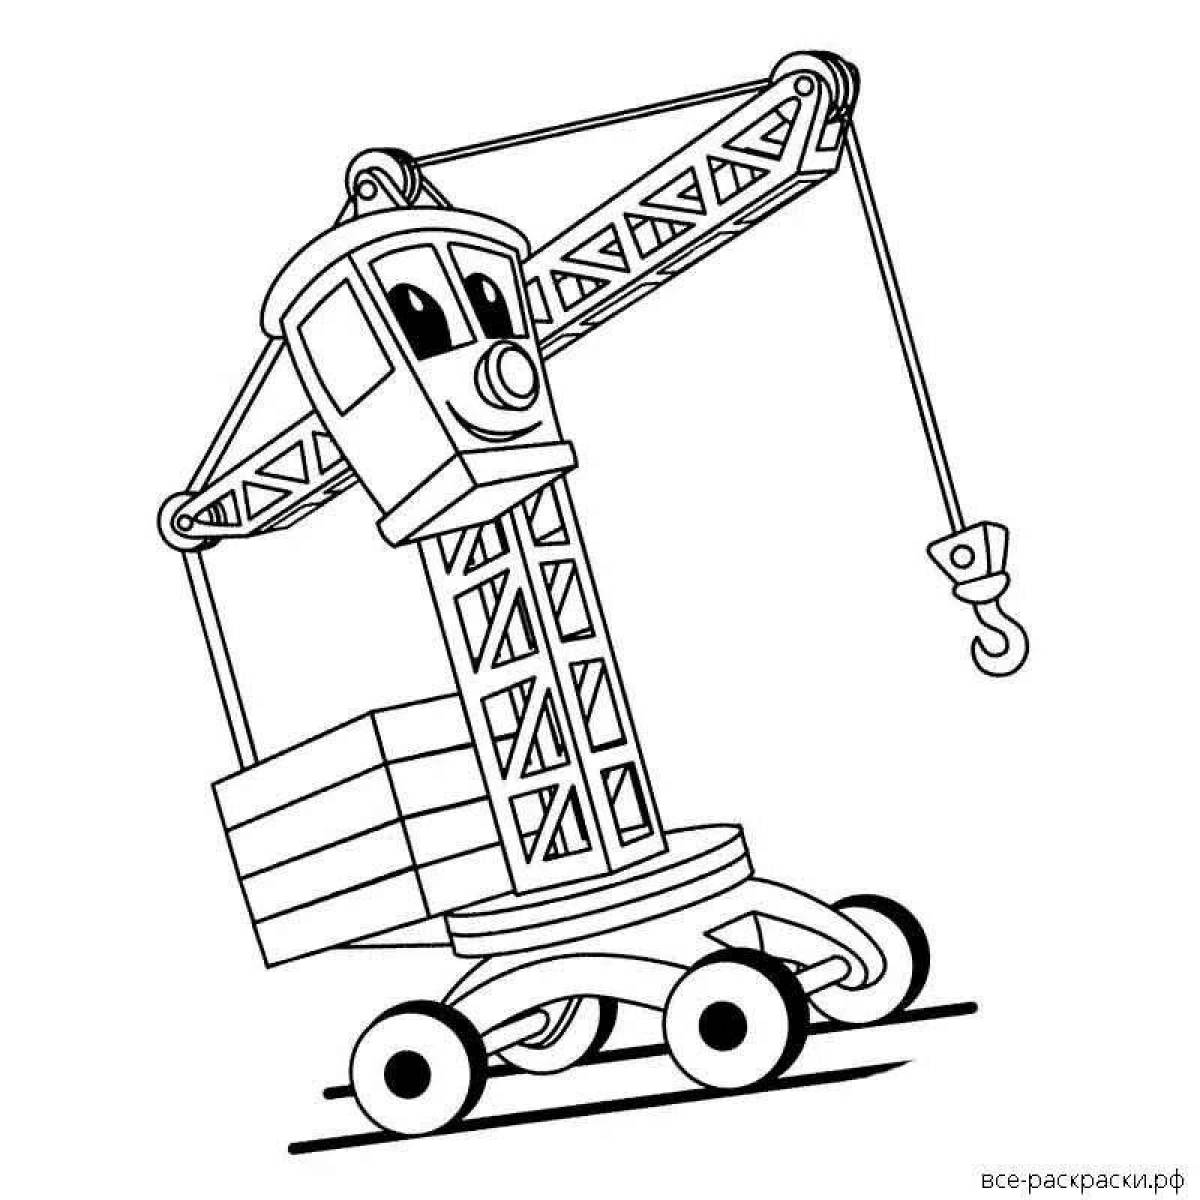 Innovative crane coloring book for 2-3 year olds